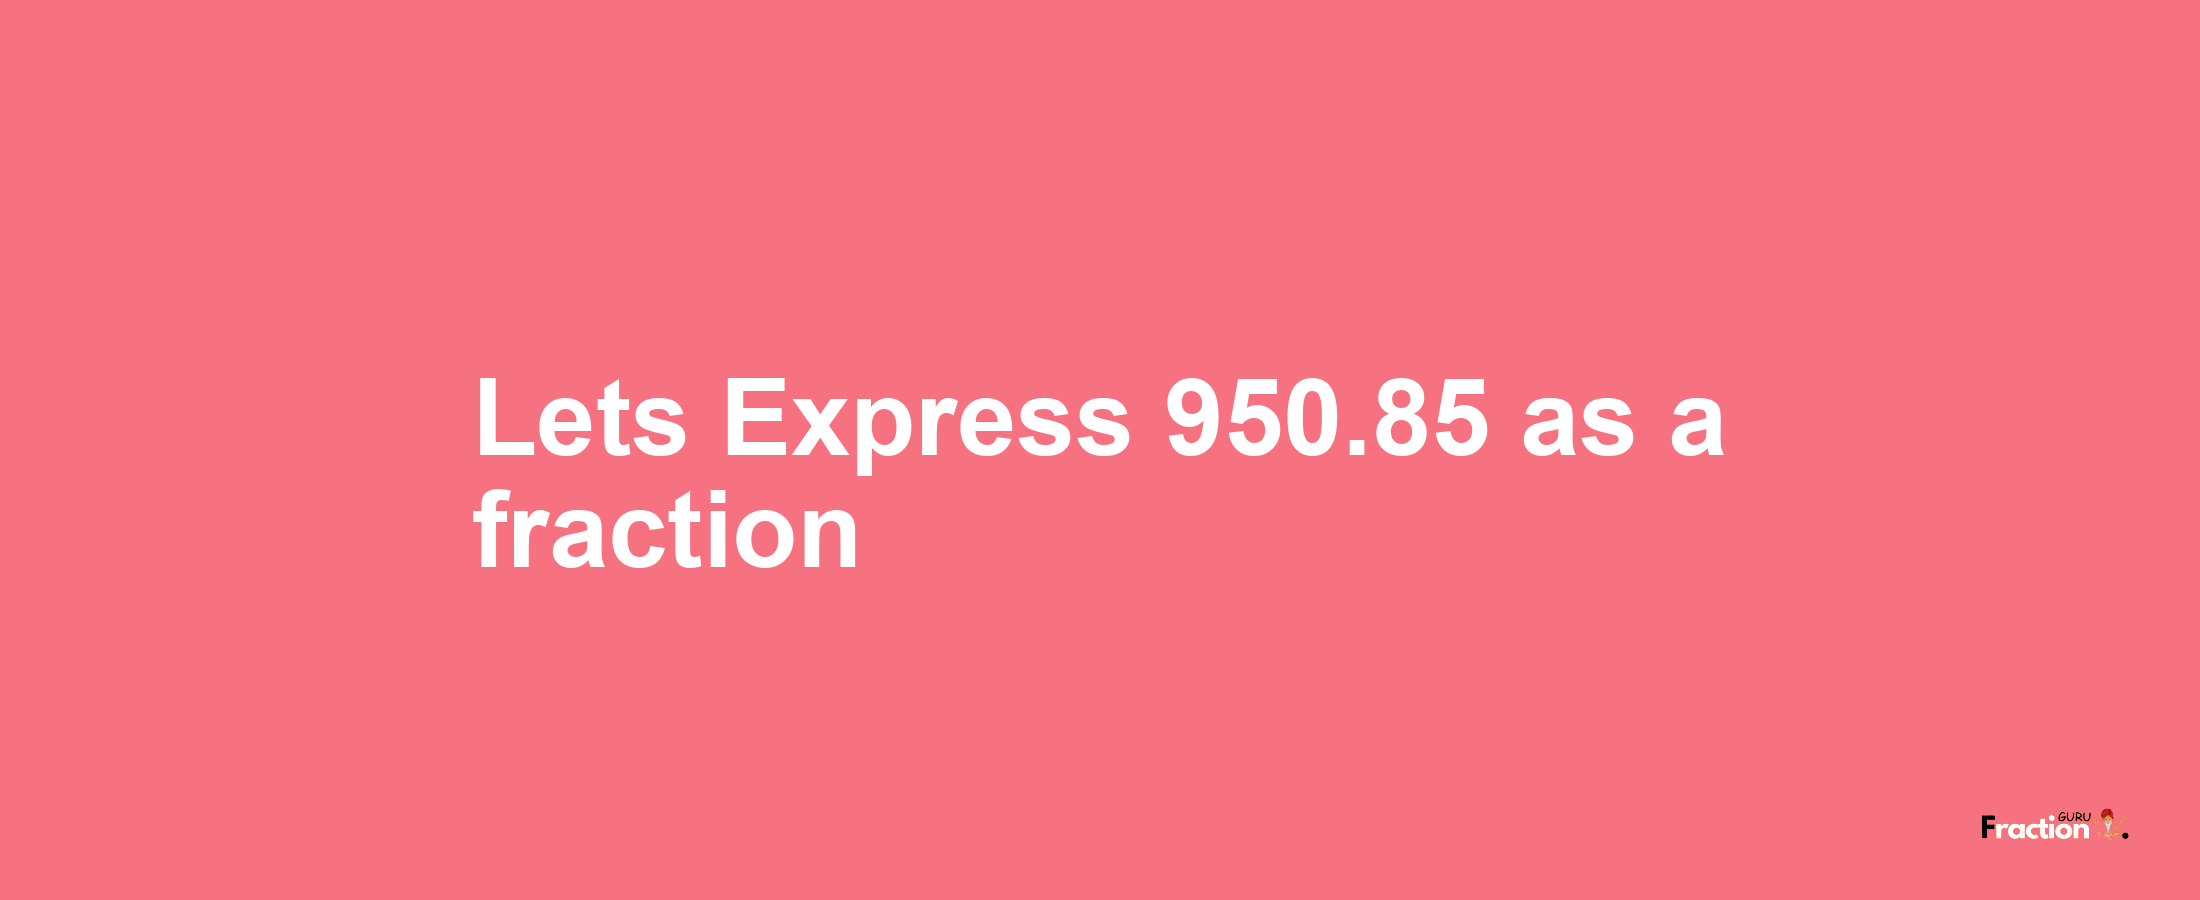 Lets Express 950.85 as afraction